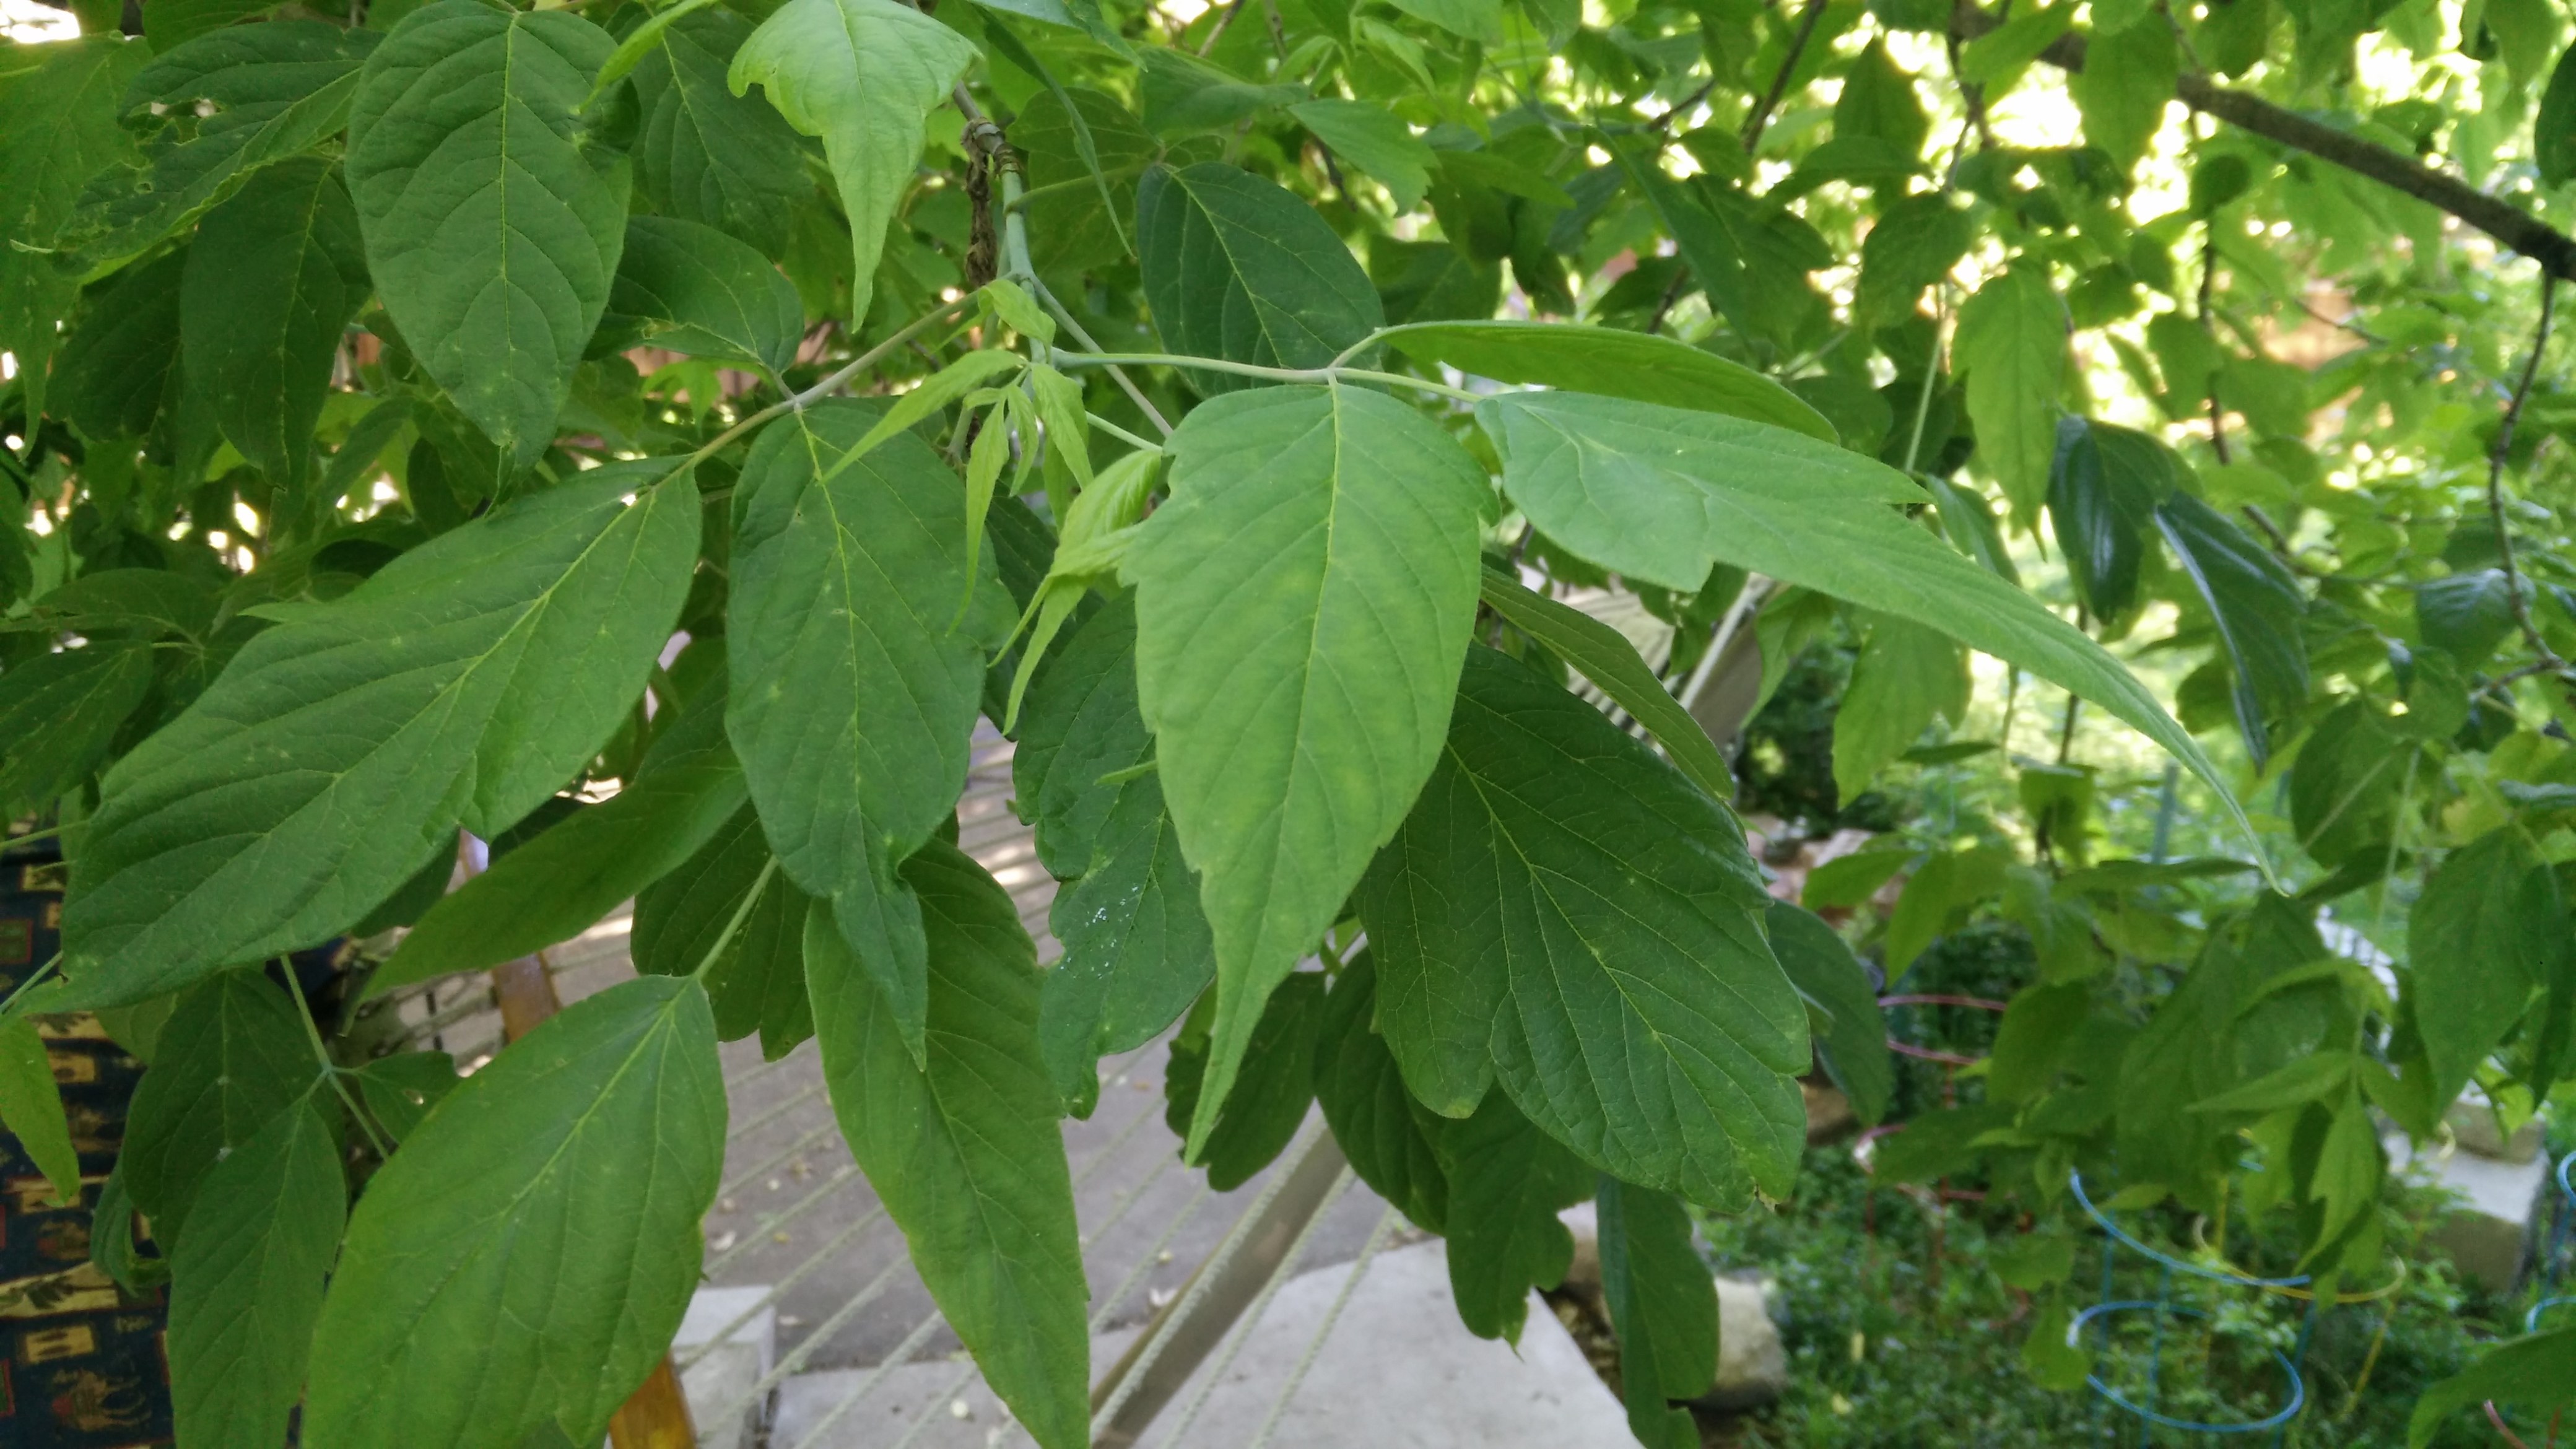 Trying to identify a tree - leaves grow opposite each other and ...